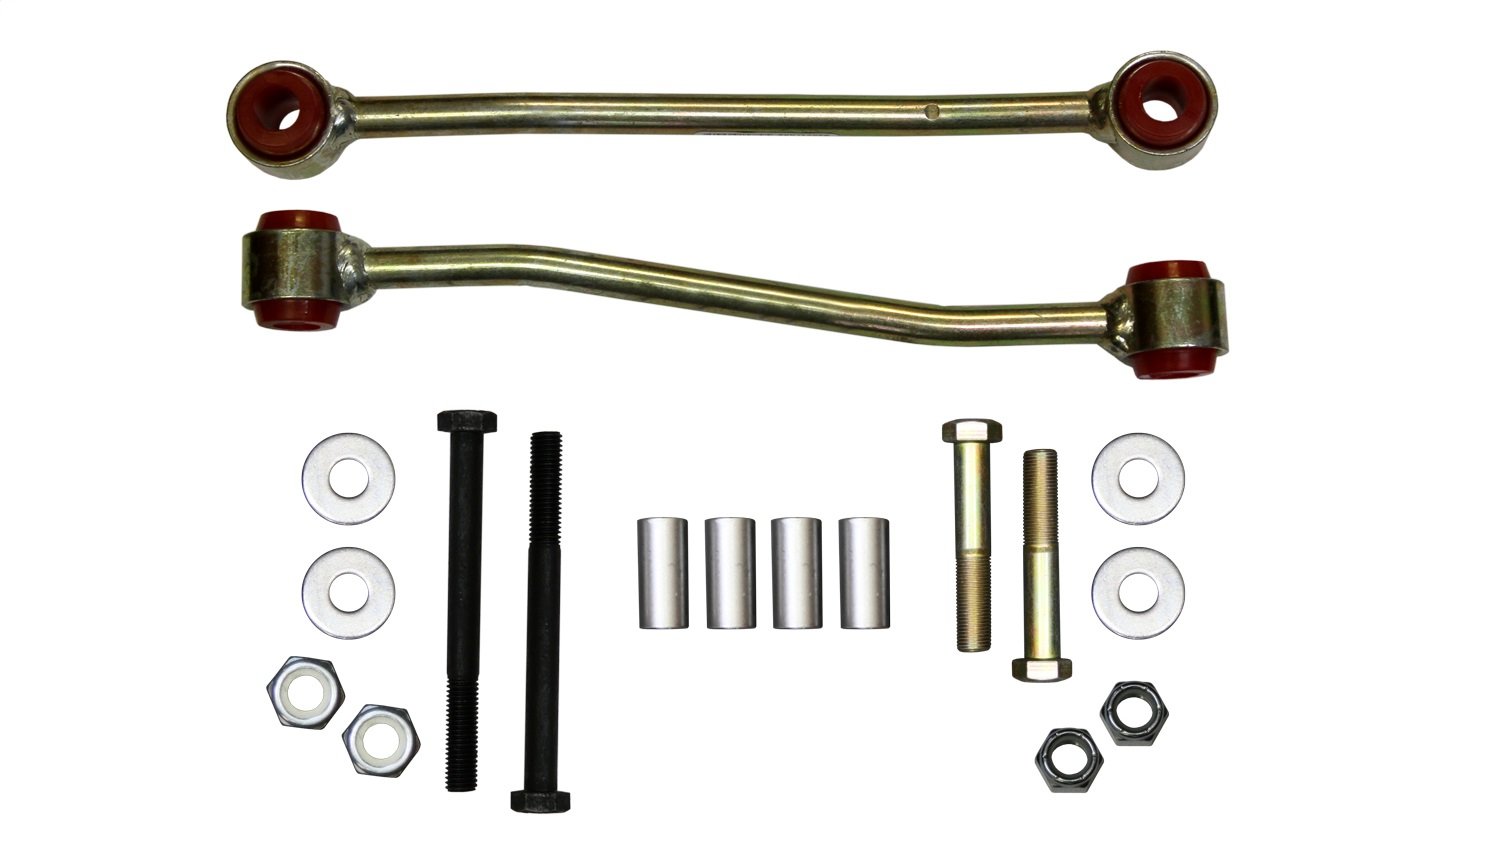 Sway Bar End Links 1999, 2003 F-250/F-350 Pickup Super Duty 4WD - Built After March 1999